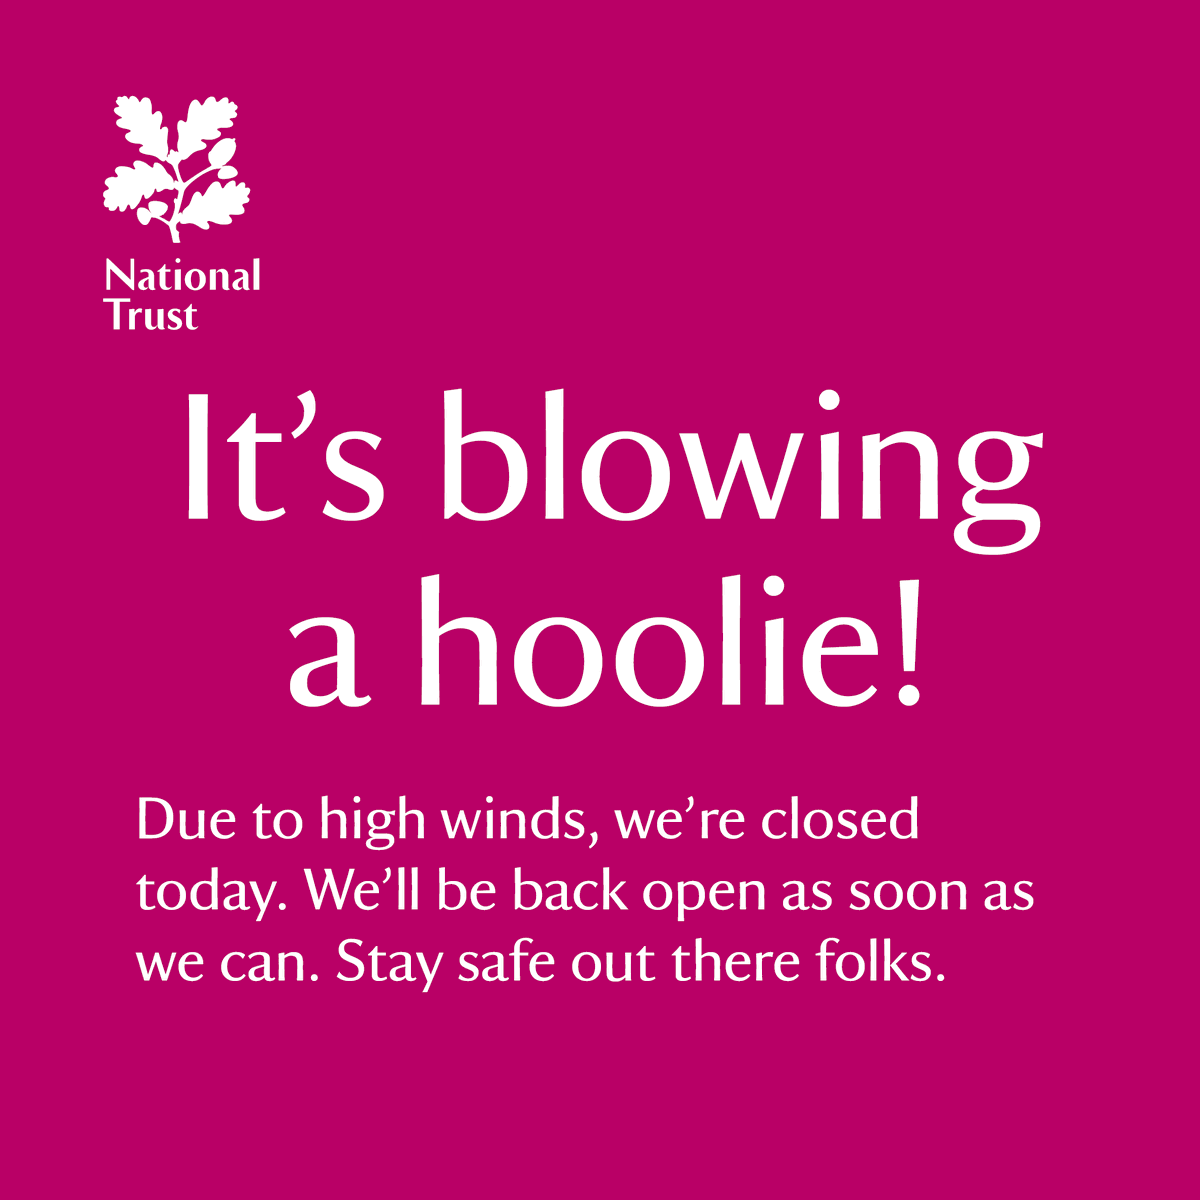 ⚠️Due to high winds today - Tuesday 9 April - last entry will be at 12 noon and the garden will close completely at 1pm. Please check our website or social media before you travel. Thank you for your understanding.